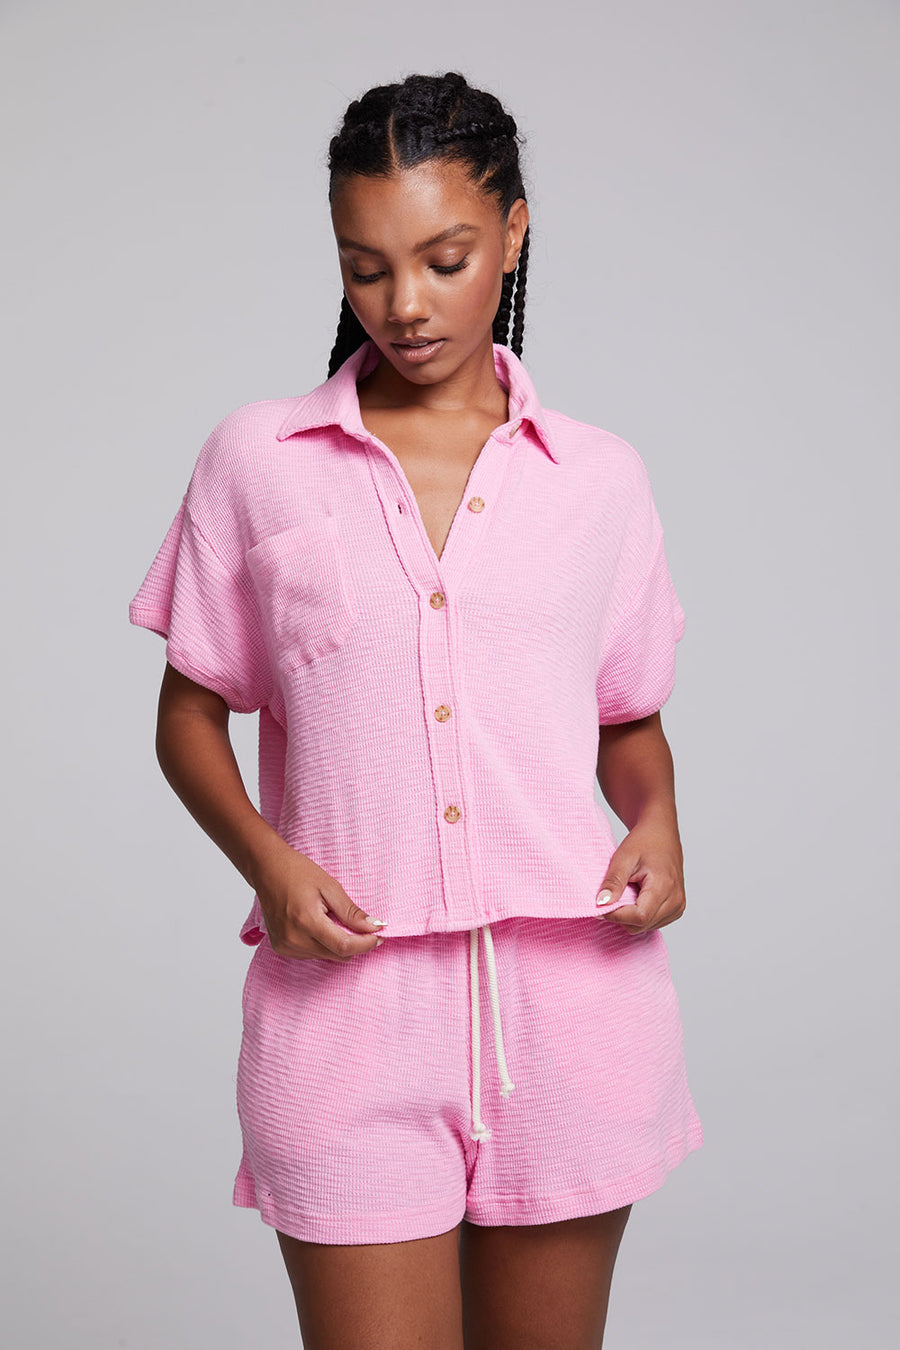 Valentina Rosewater Button Down WOMENS chaserbrand